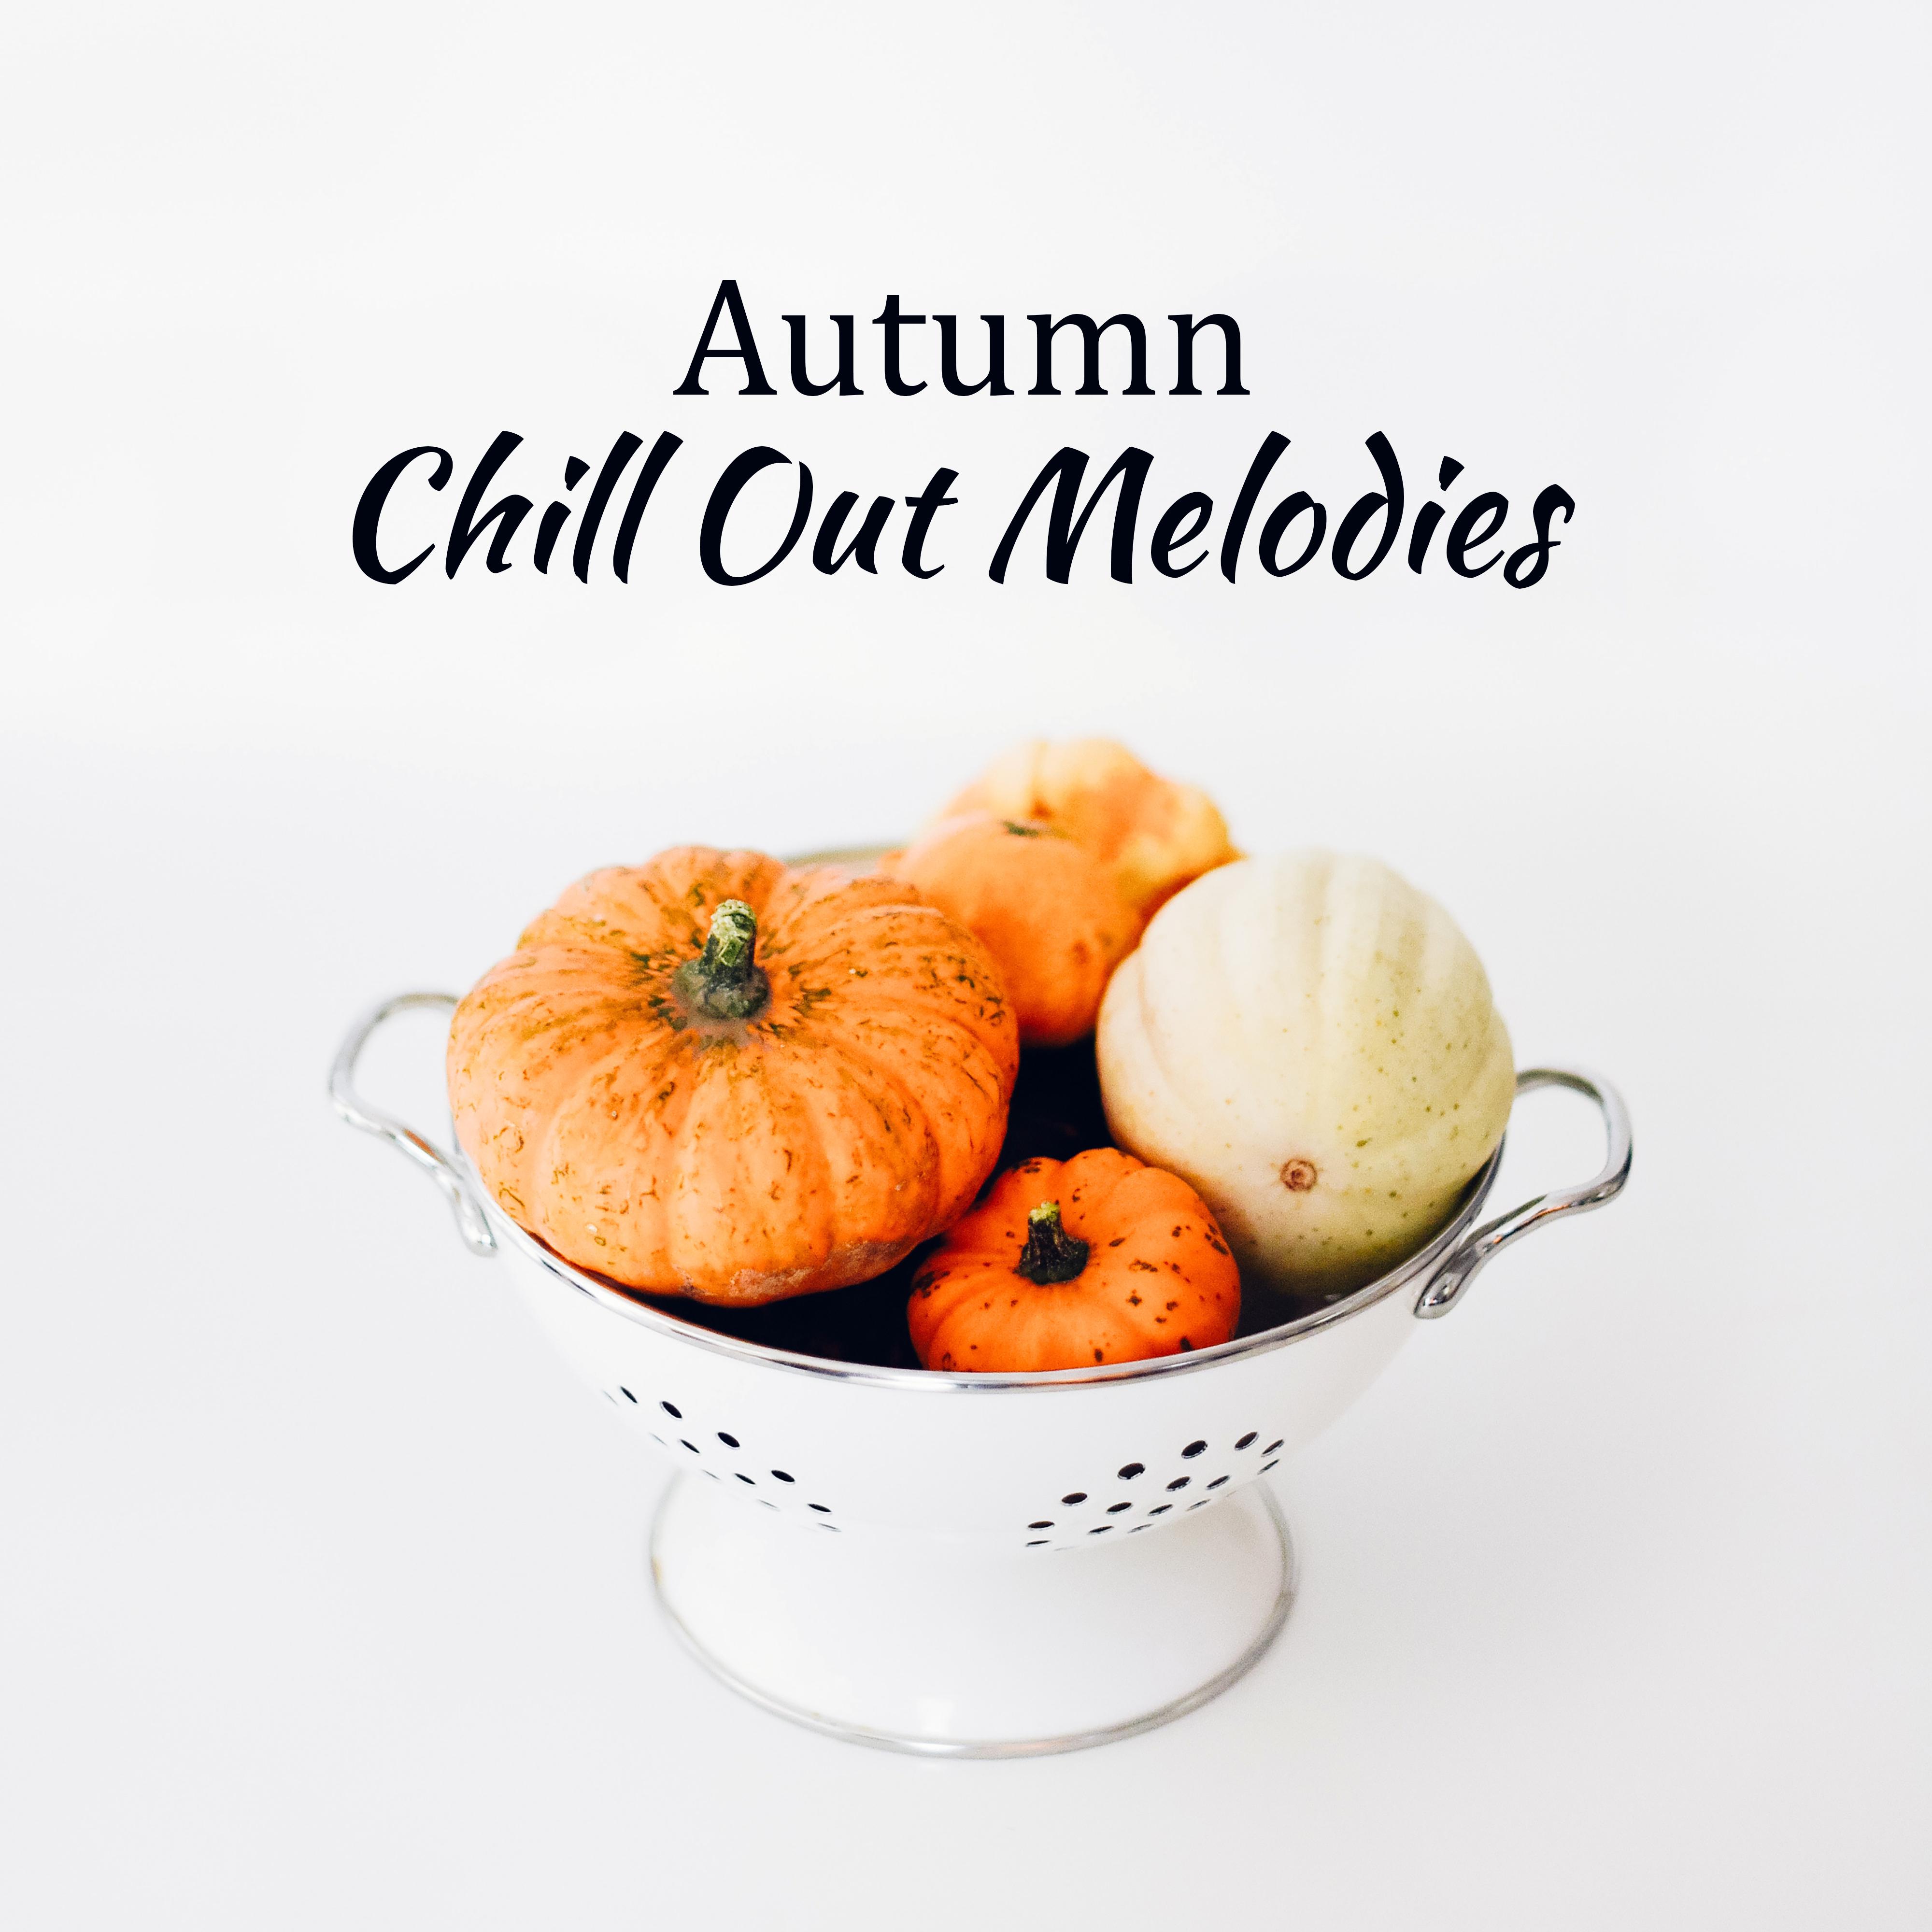 Autumn Chill Out Melodies